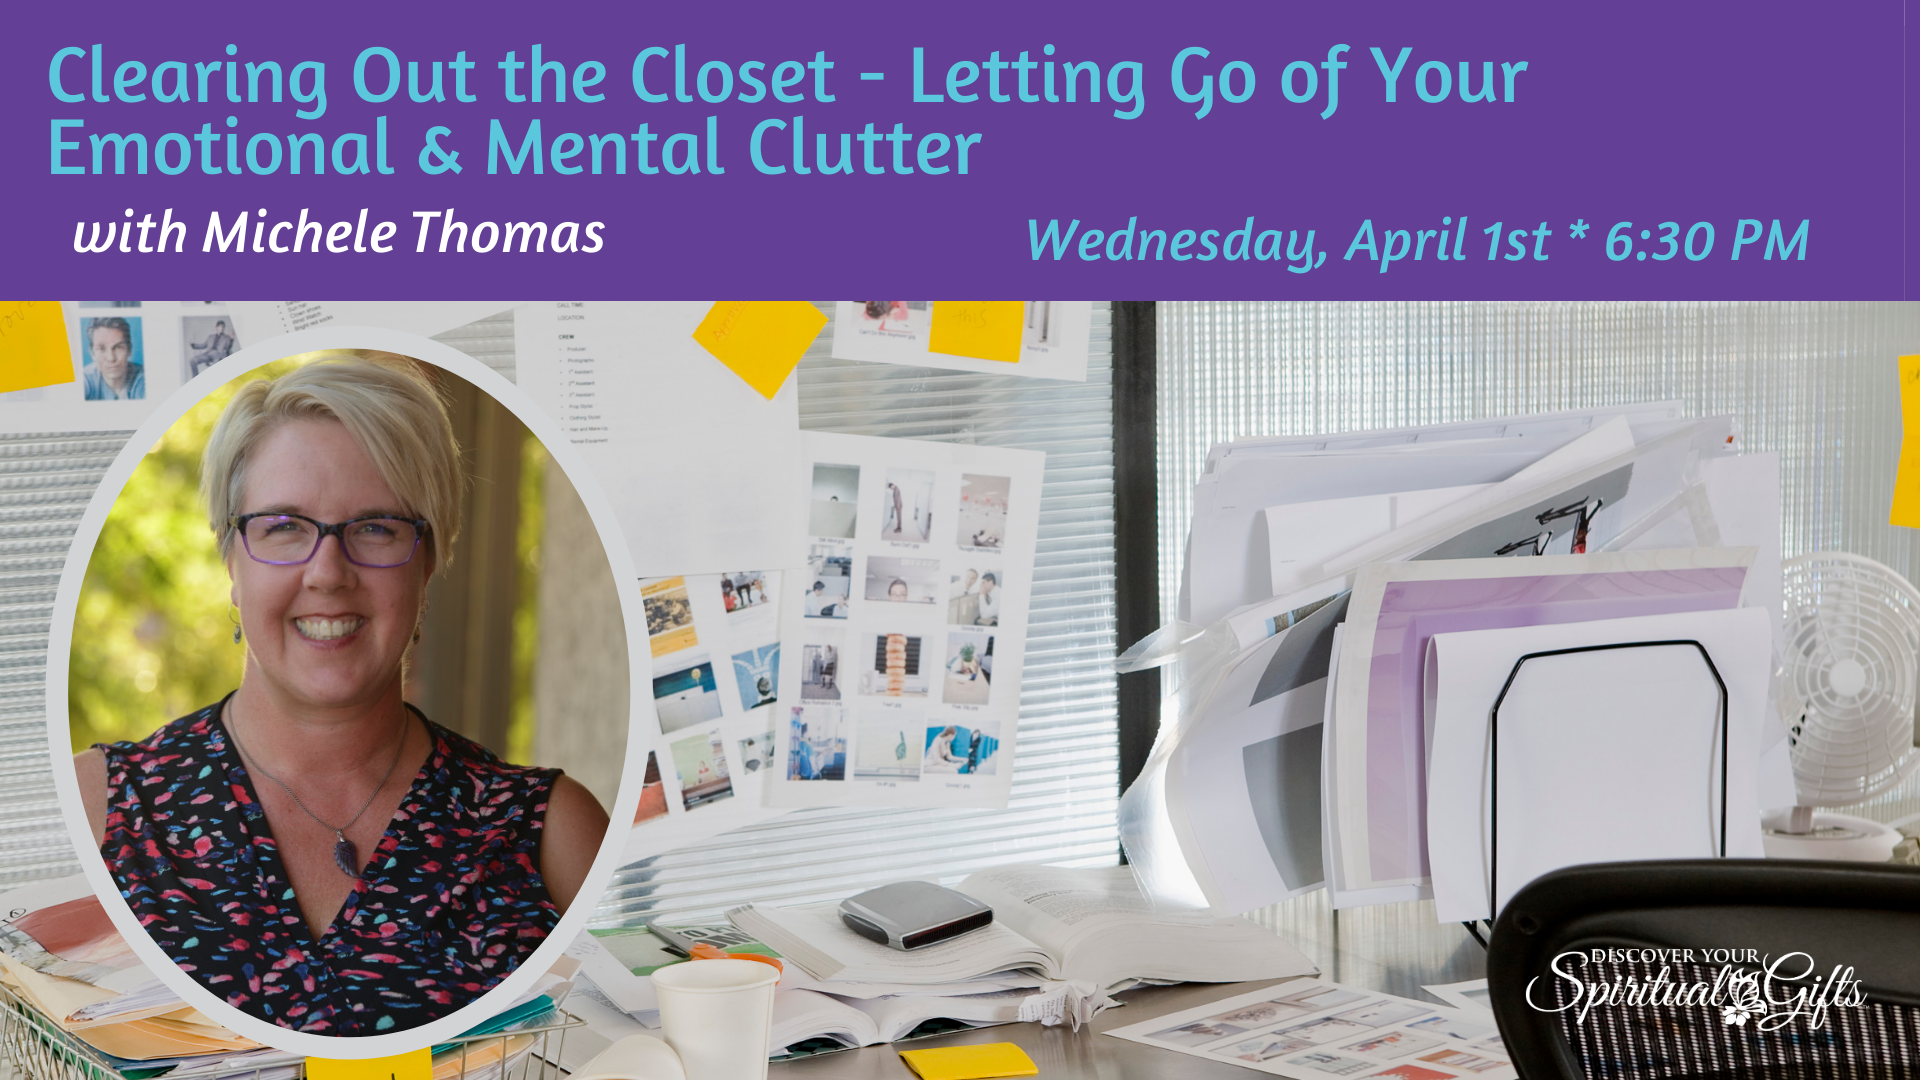 Clearing Out the Closet: Letting Go of Emotional & Mental Clutter